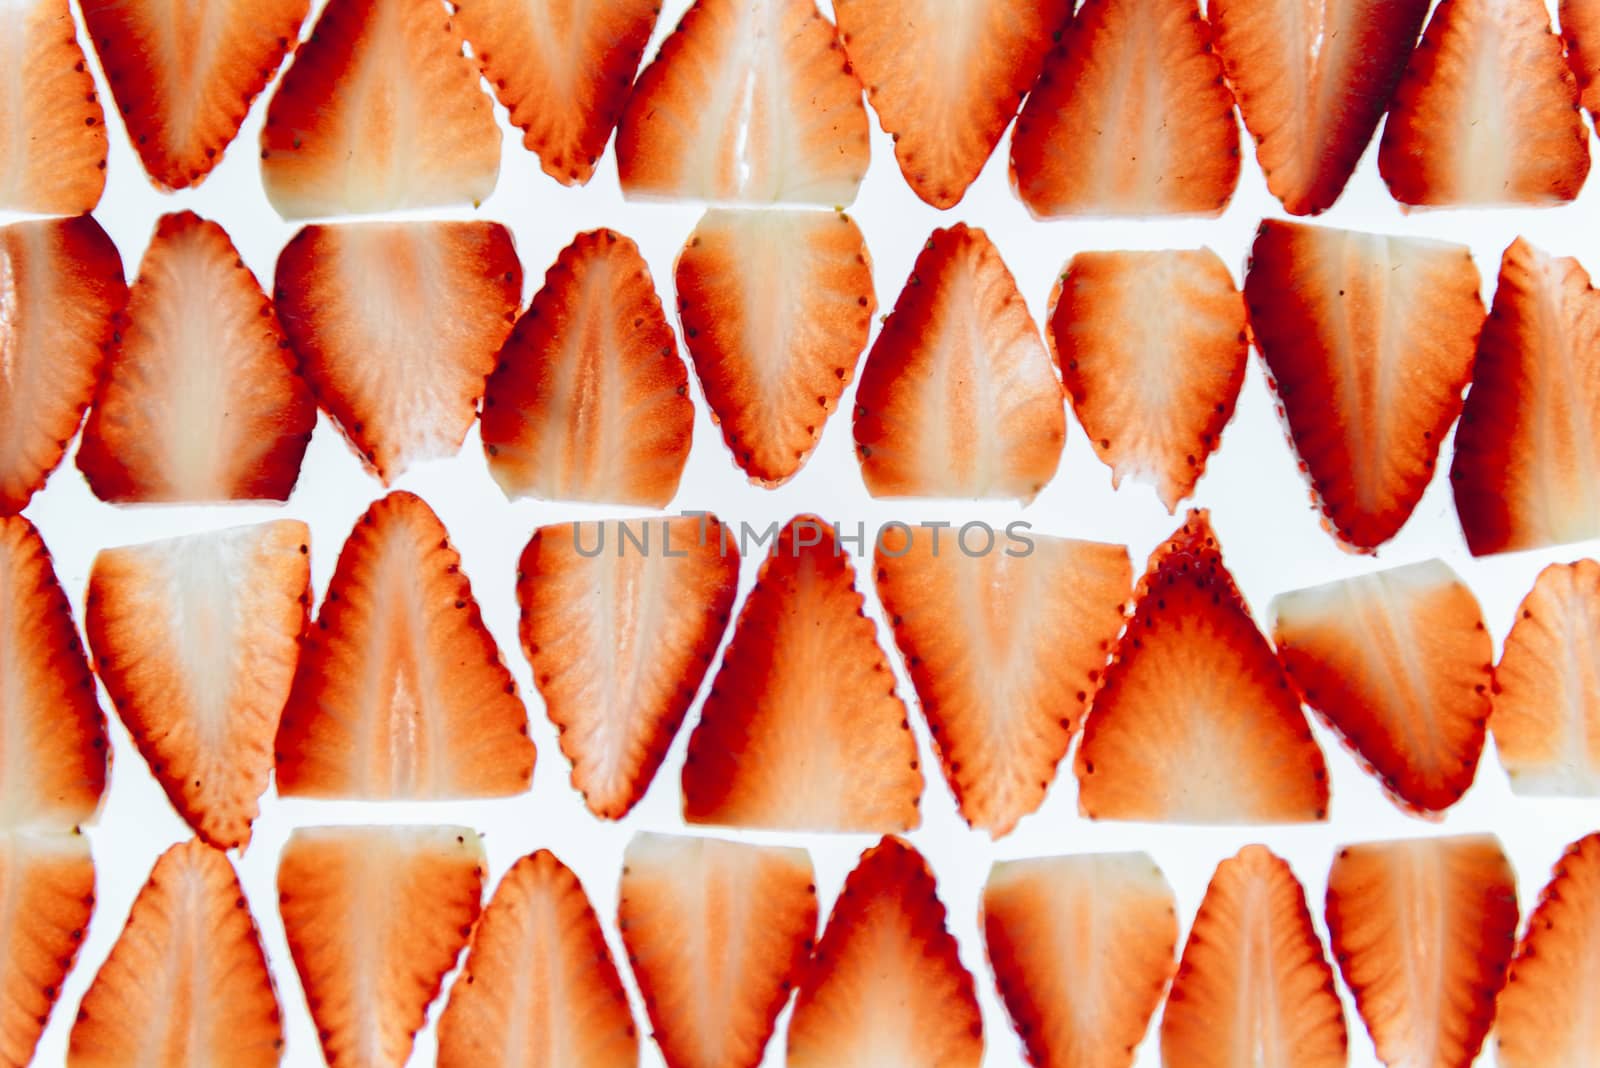 sliced fresh strawberries isolated on white background, neatly arranged slices of red strawberry on a white background, healthy sweet food, vitamins and fruity concept, top view